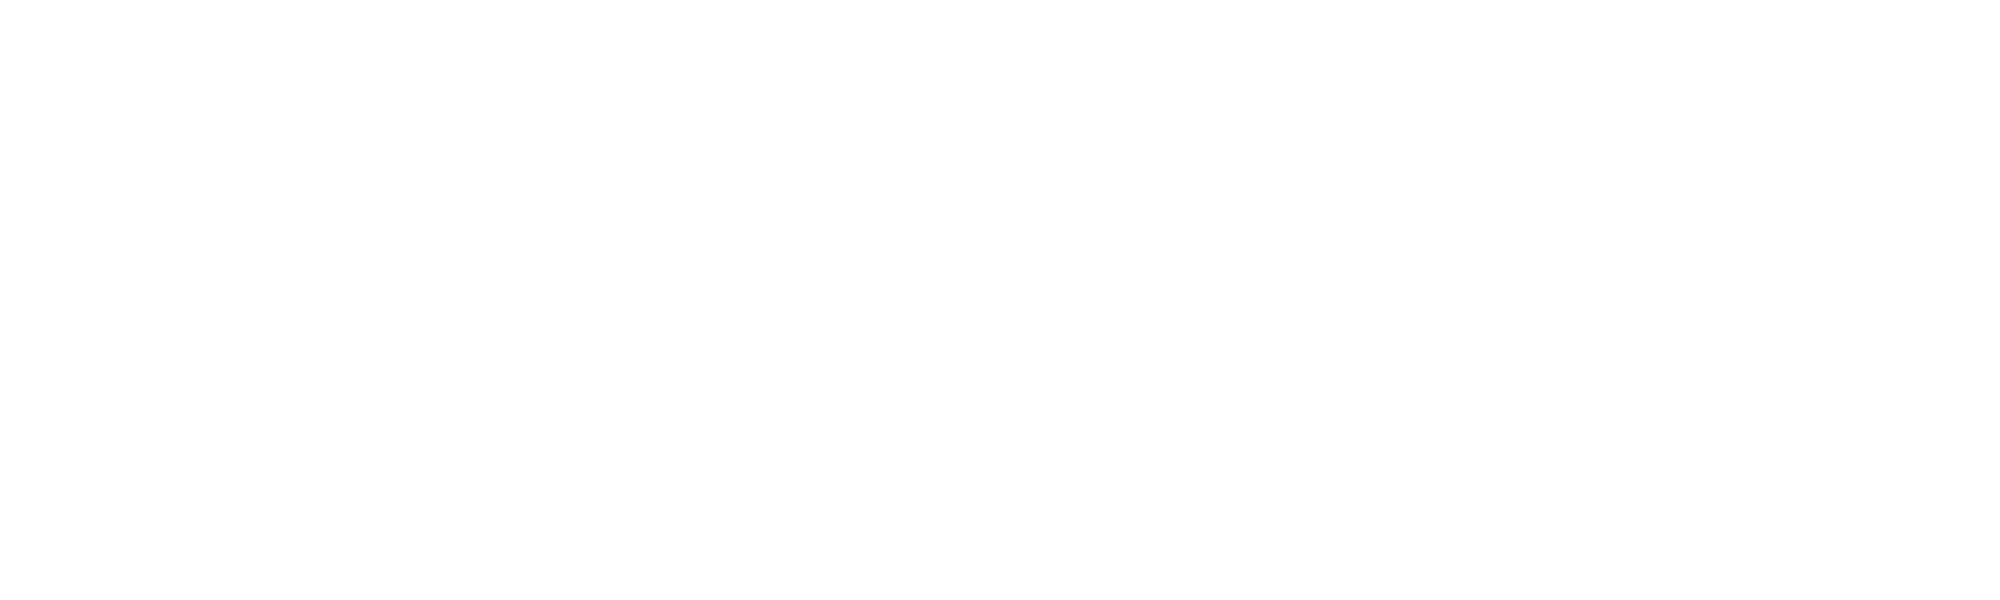 pc_banner_contact_movie_on